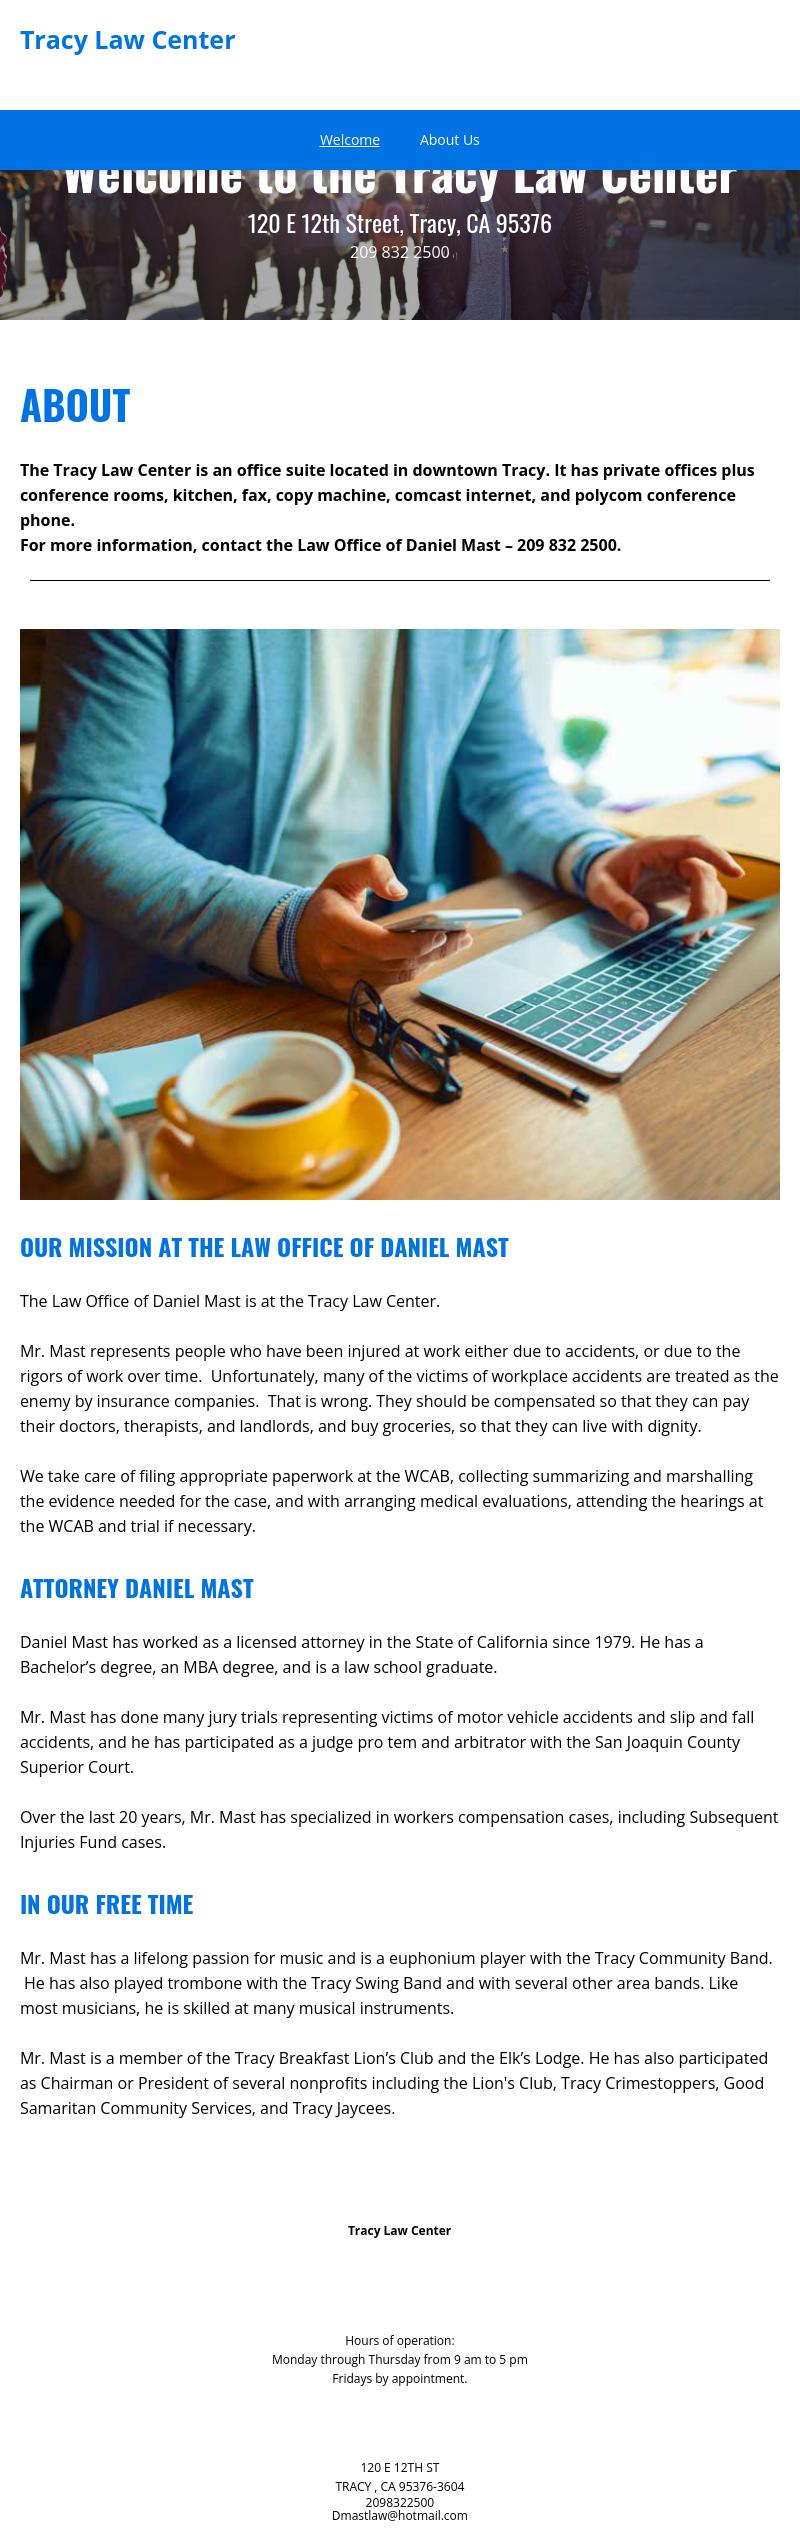 Law Offices of Daniel P. Mast - Tracy CA Lawyers